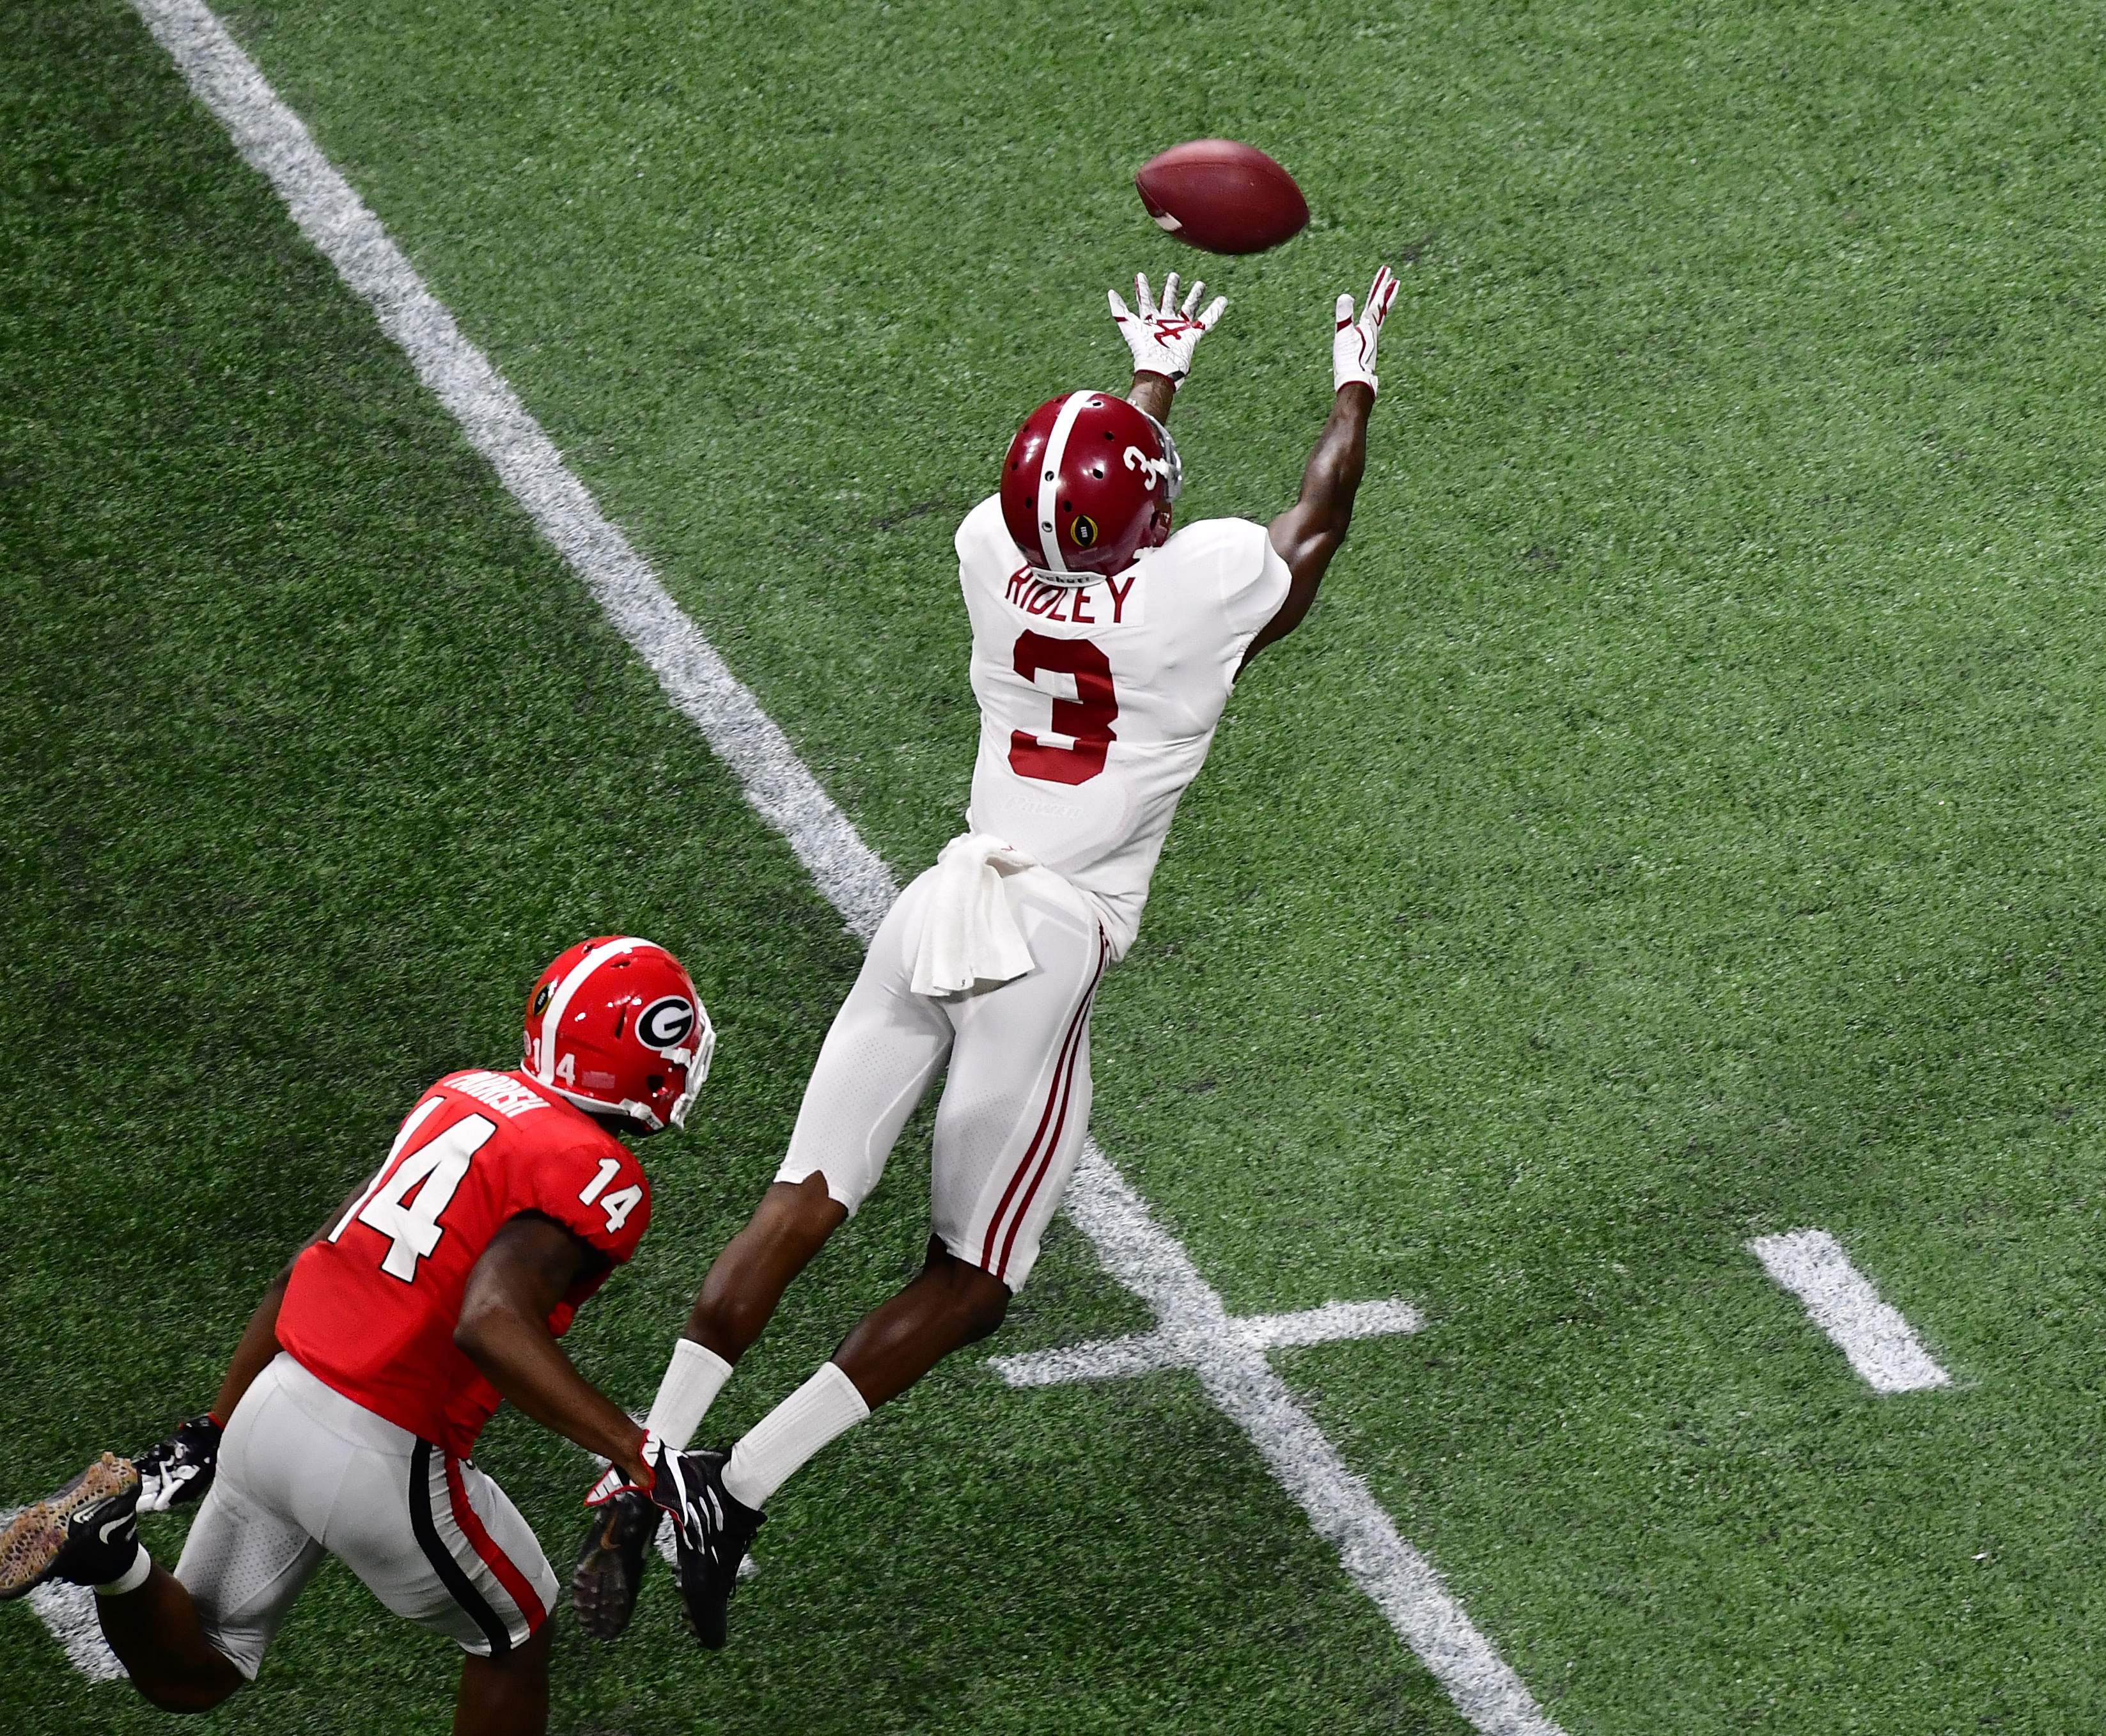 Calvin Ridley #3 of the Alabama Crimson Tide is unable to make a diving catch against the Georgia Bulldogs in the CFP National Championship presented by AT&T at Mercedes-Benz Stadium on January 8, 2018 in Atlanta, Georgia. (Photo by Scott Cunningham/Getty Images)